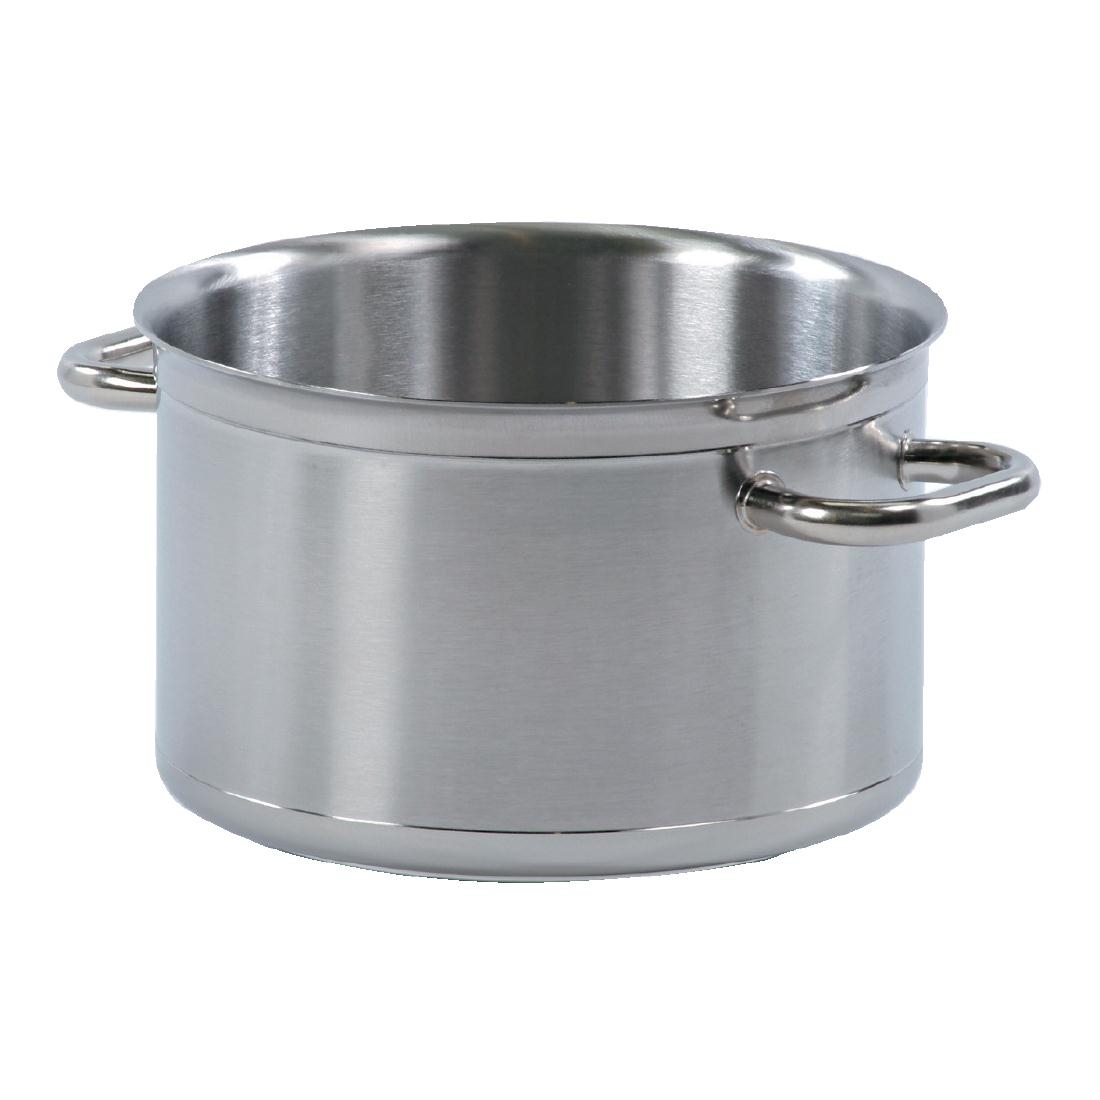 Bourgeat Tradition Plus Boiling Pan 17Ltr